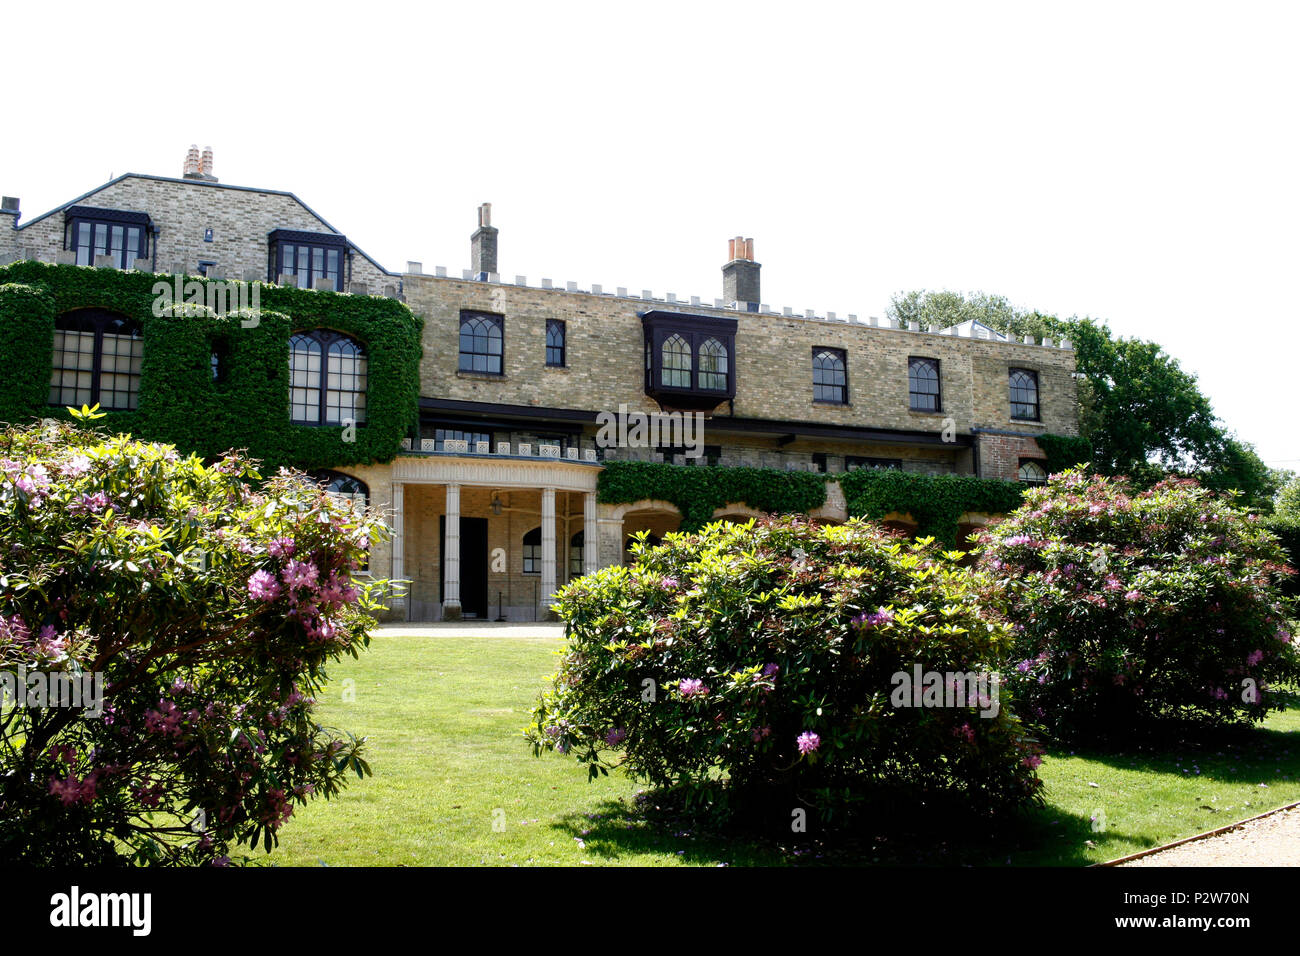 farringford house was the home of lord alfred tennyson poet in the isle of wight uk june 2018 Stock Photo